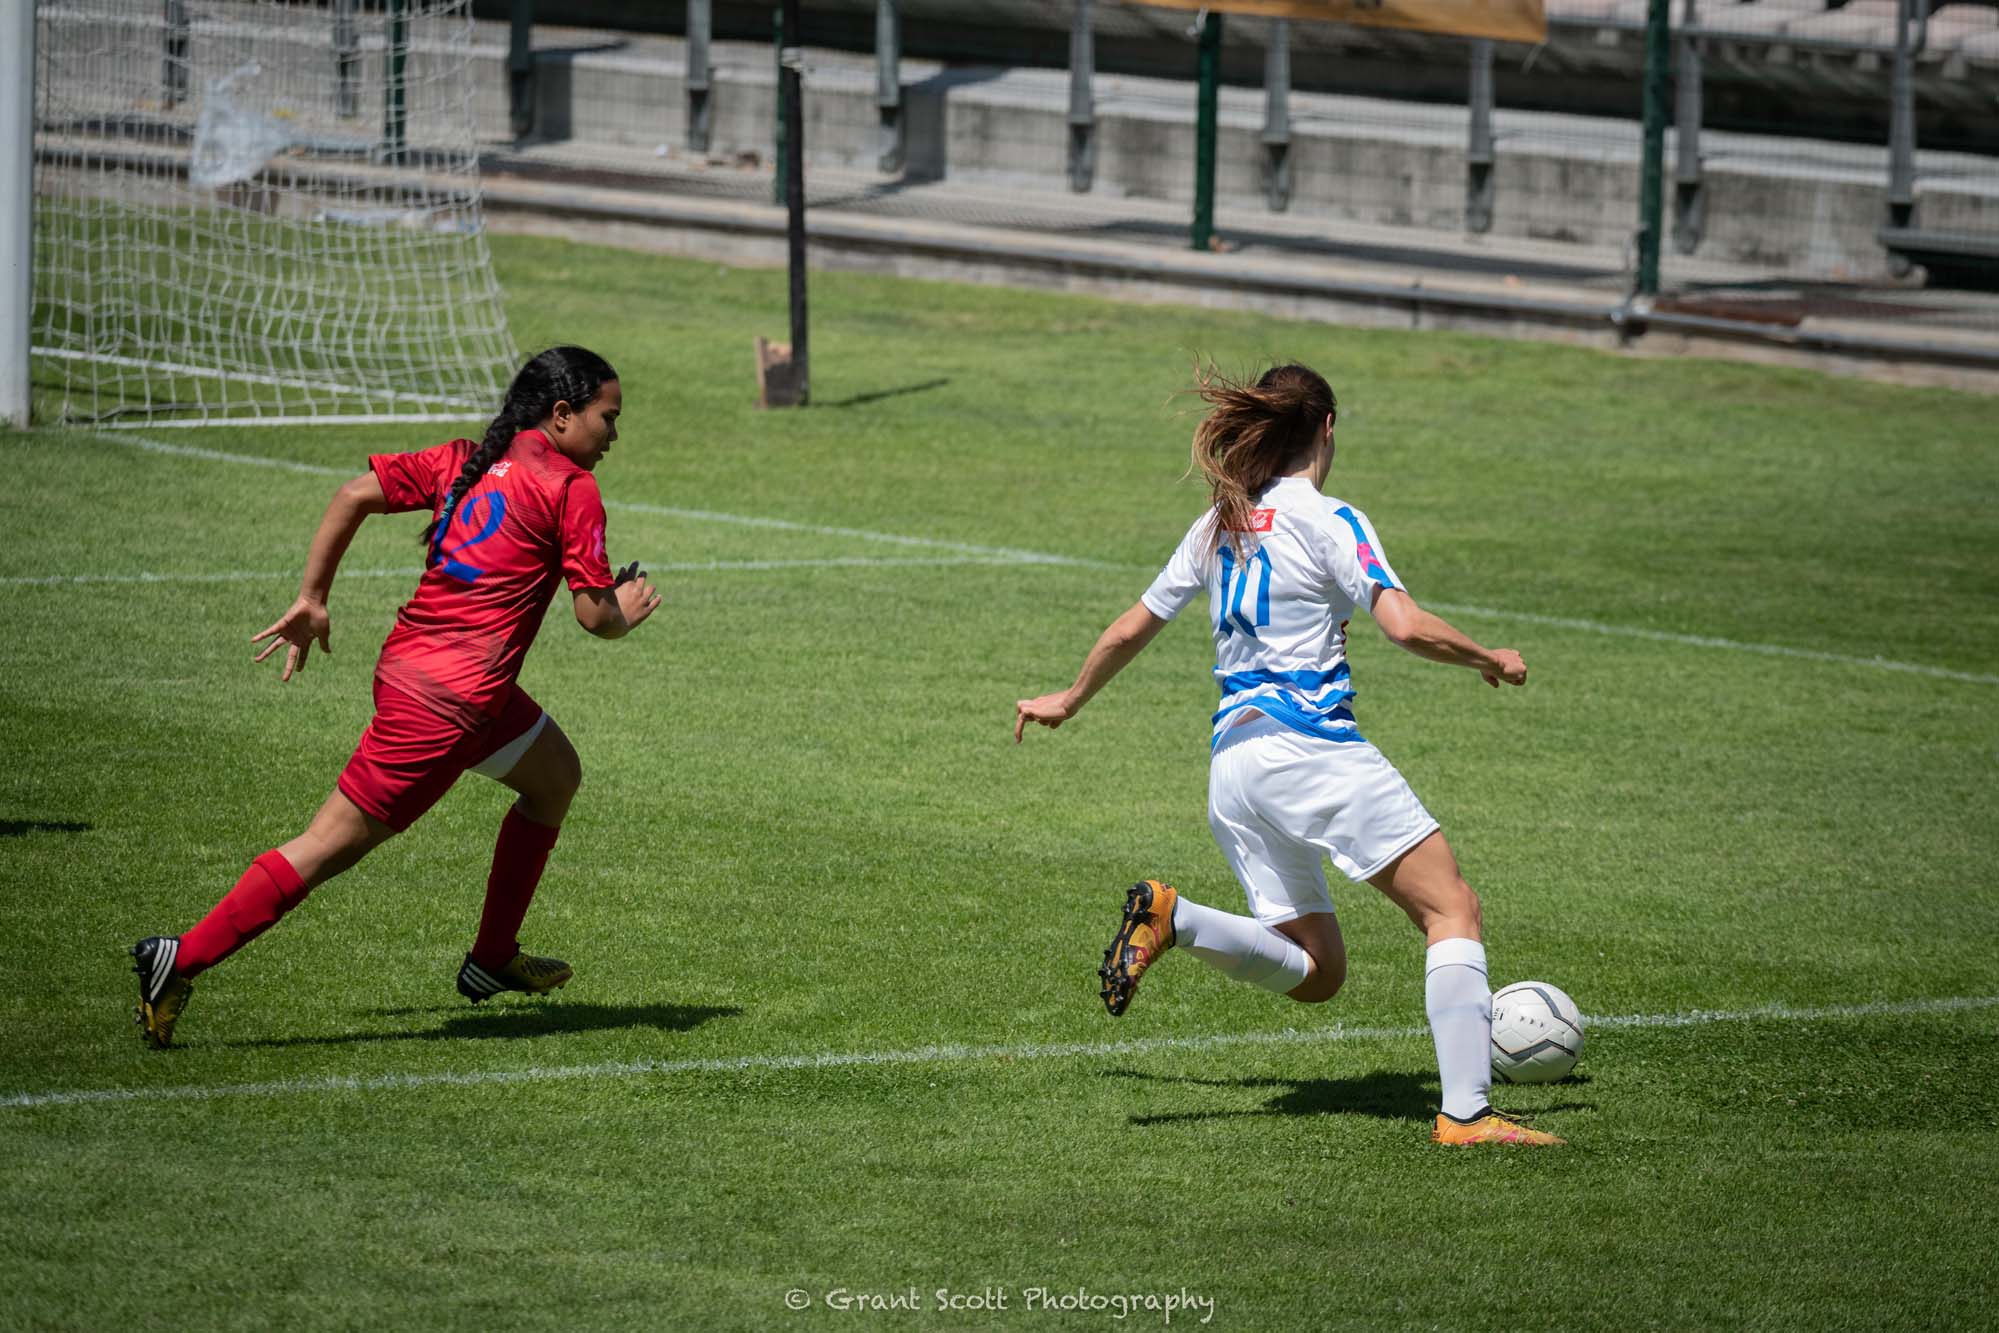 Captain Nina Woermann in action against Cape Town Spurs Women’s Football Club in a game that saw the UCT women’s football team taking home the Coca-Cola Cup with a 2–0 victory.